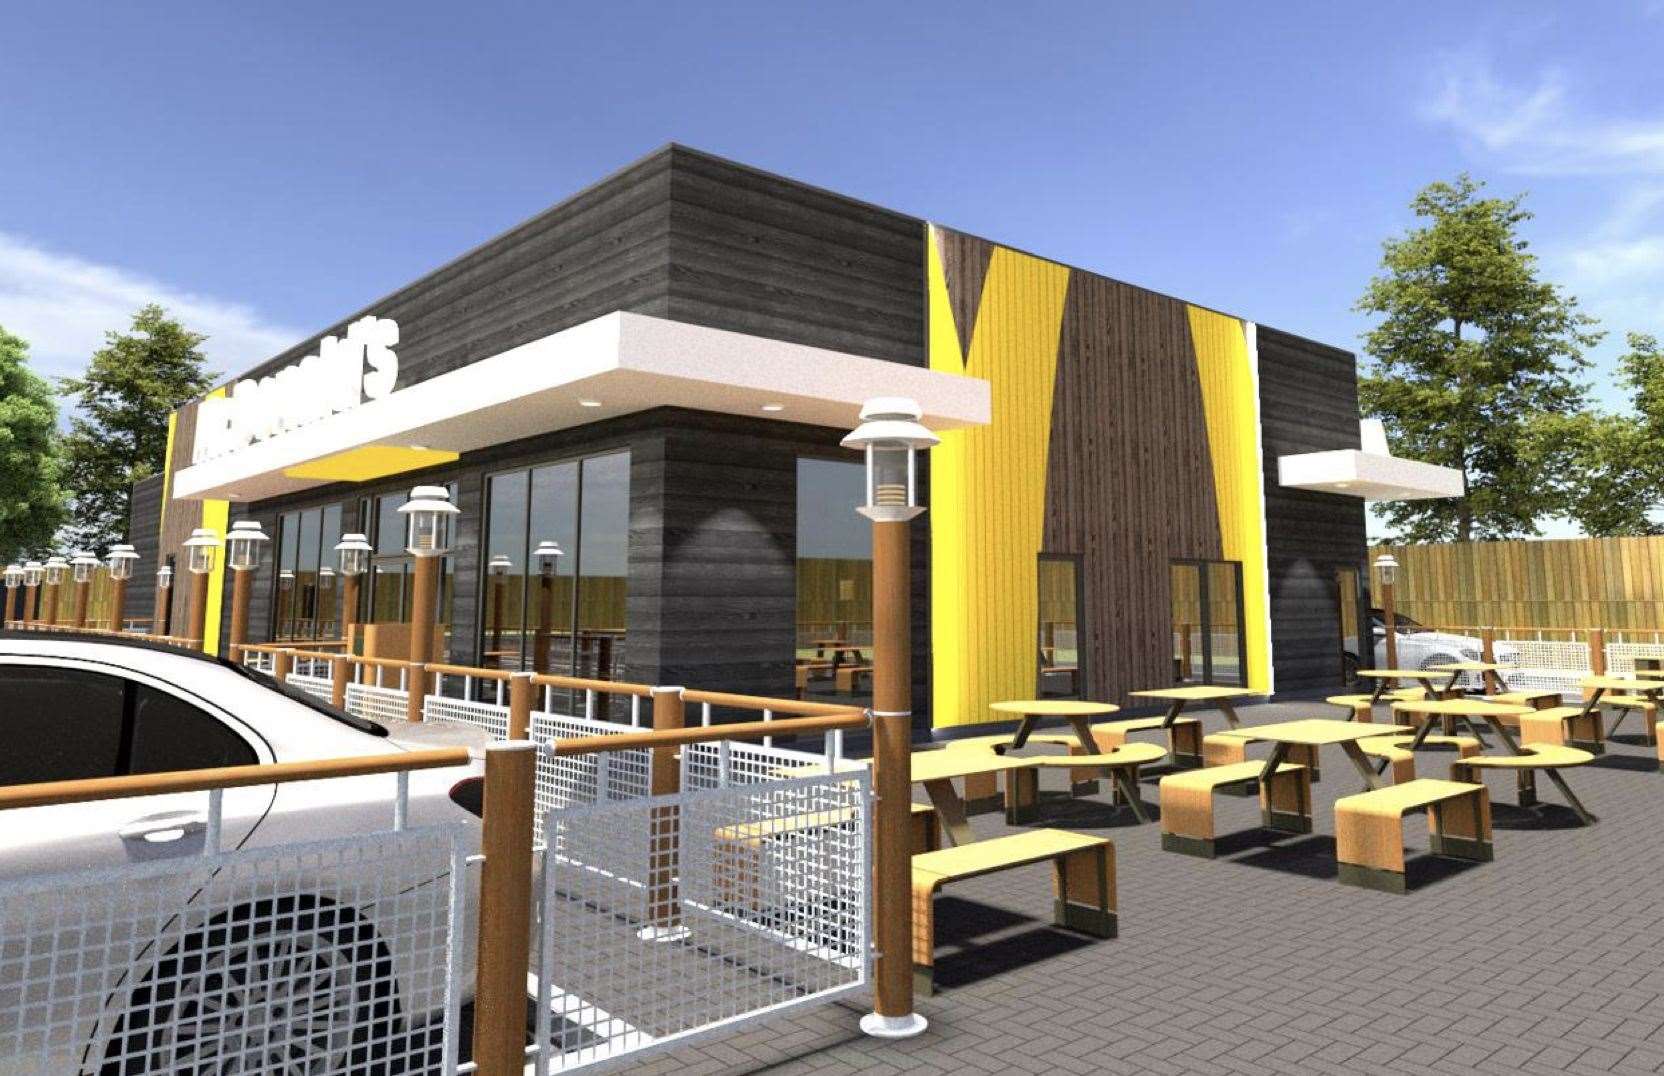 How the McDonald's at Dunkirk, between Faversham and Canterbury, could look. Picture: McDonald's UK